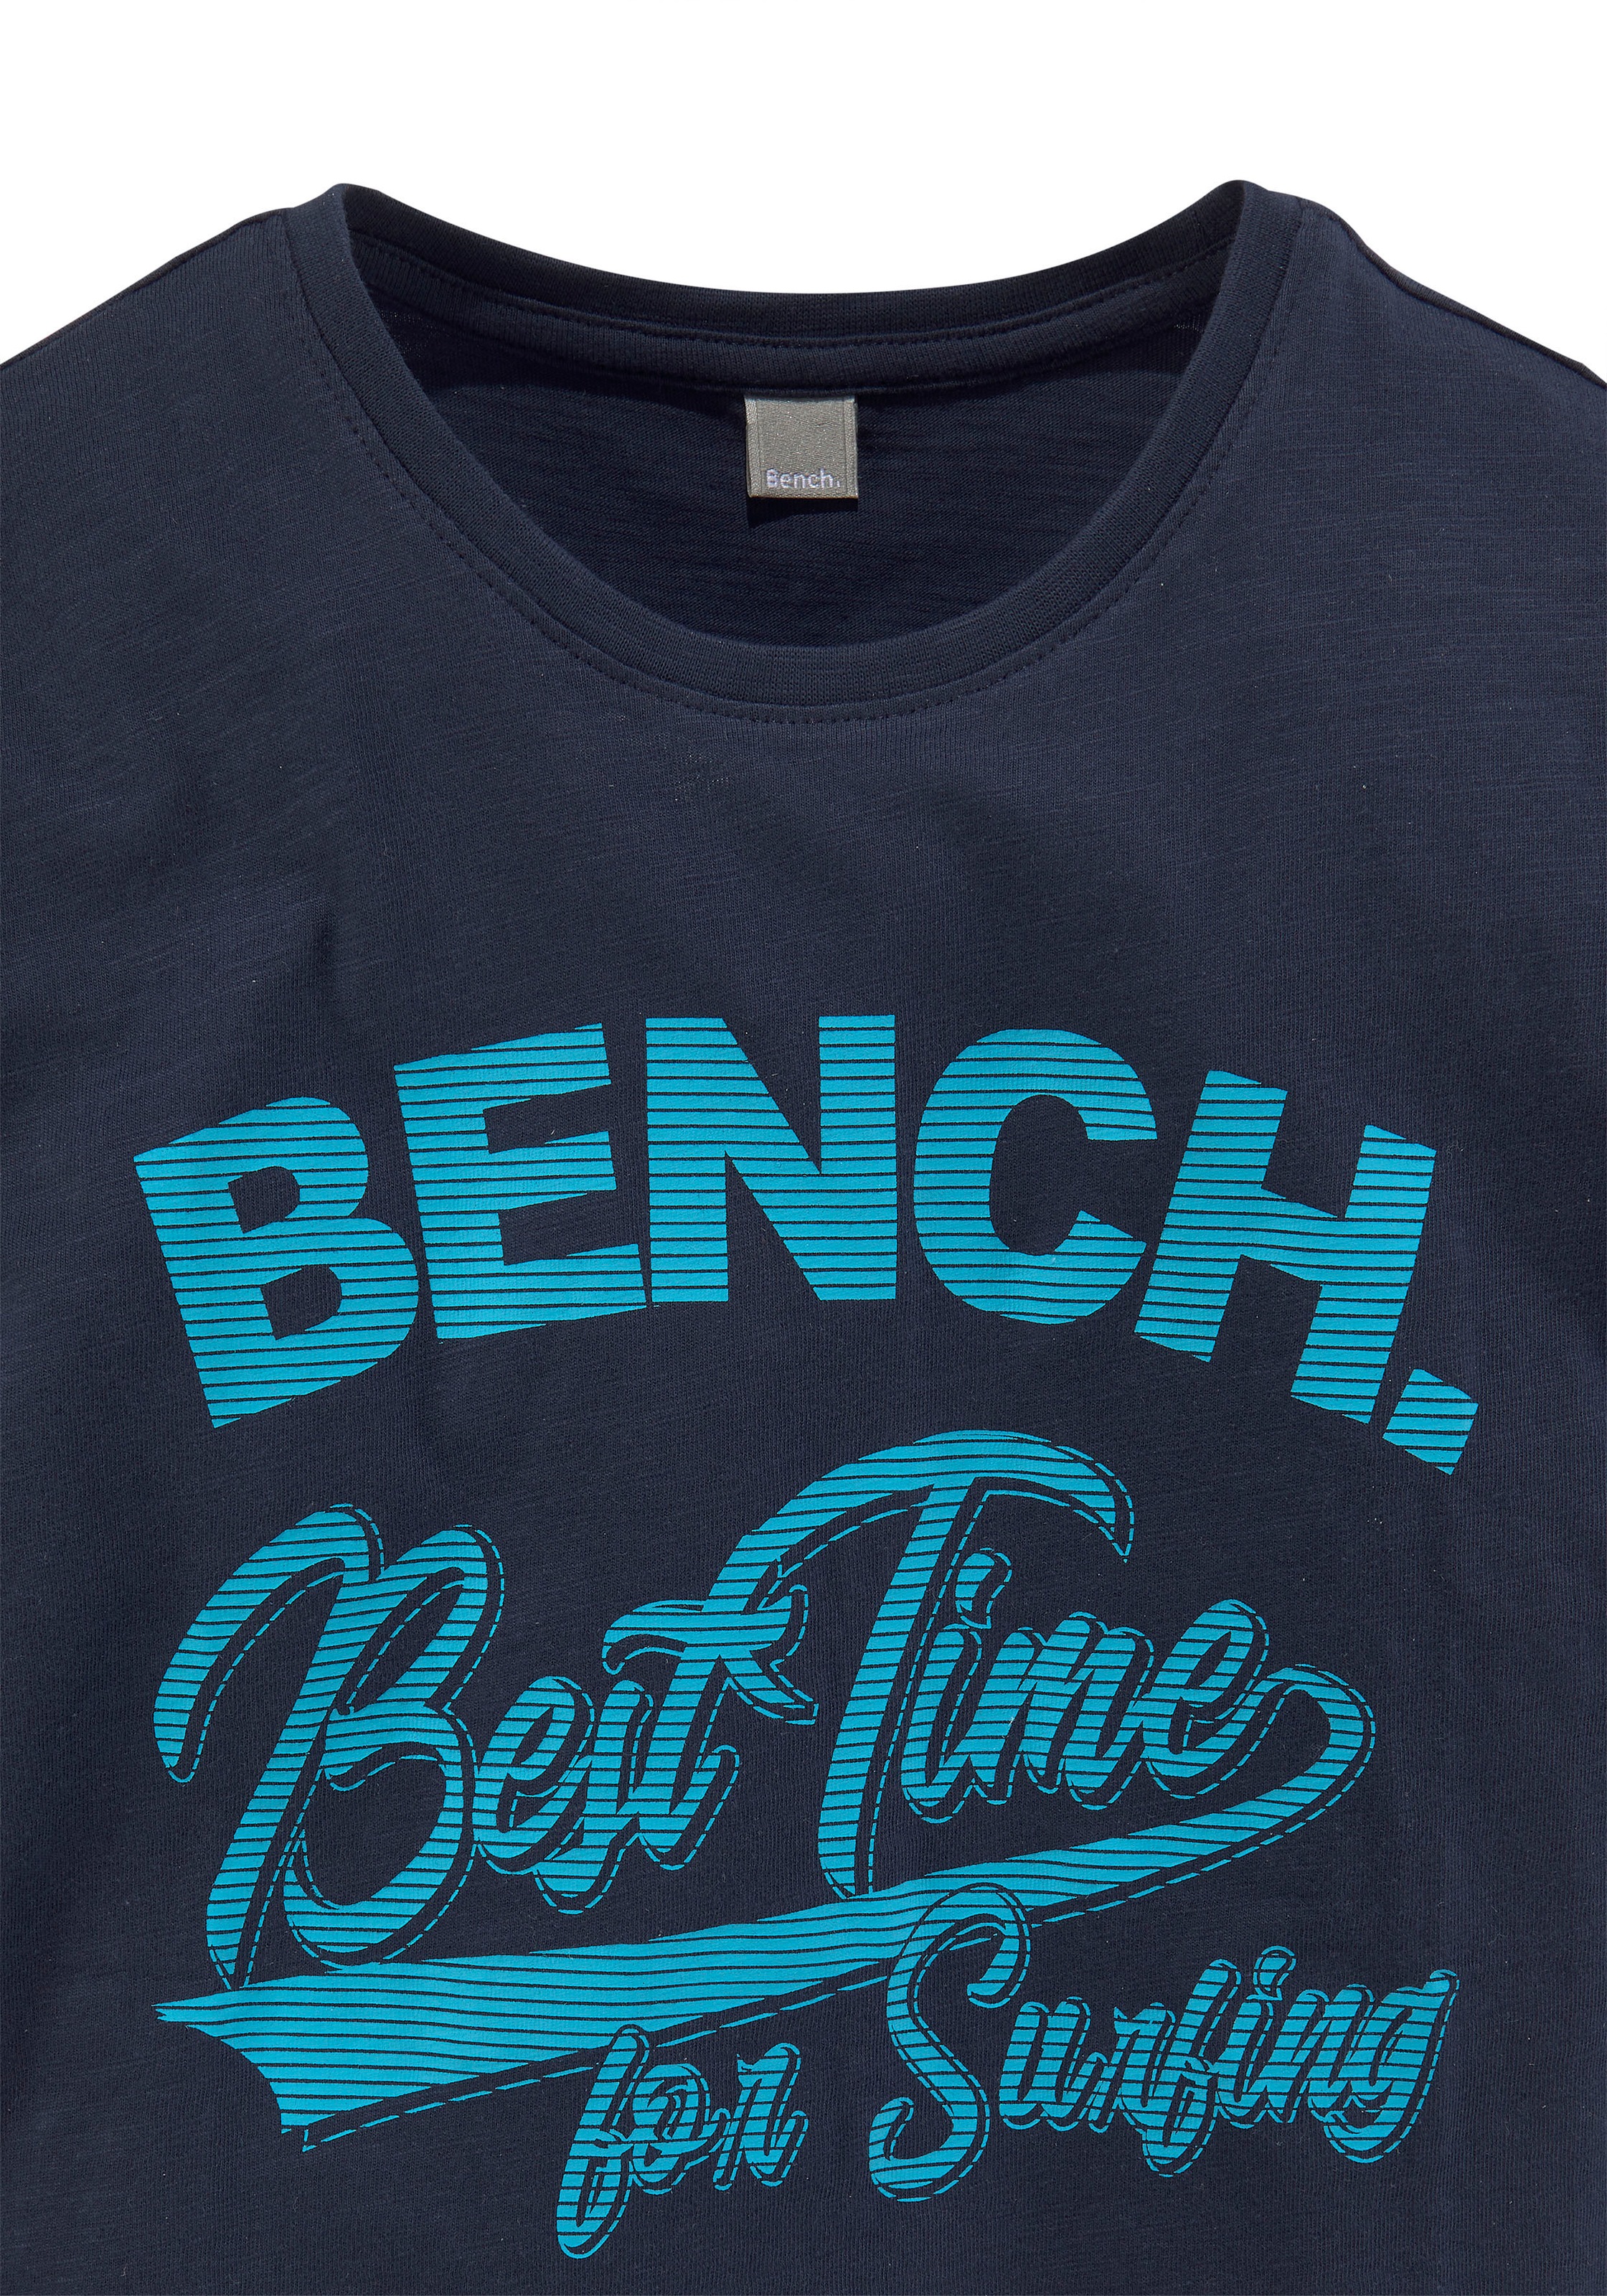 Bench. T-Shirt »Best time for surfing« bei OTTO